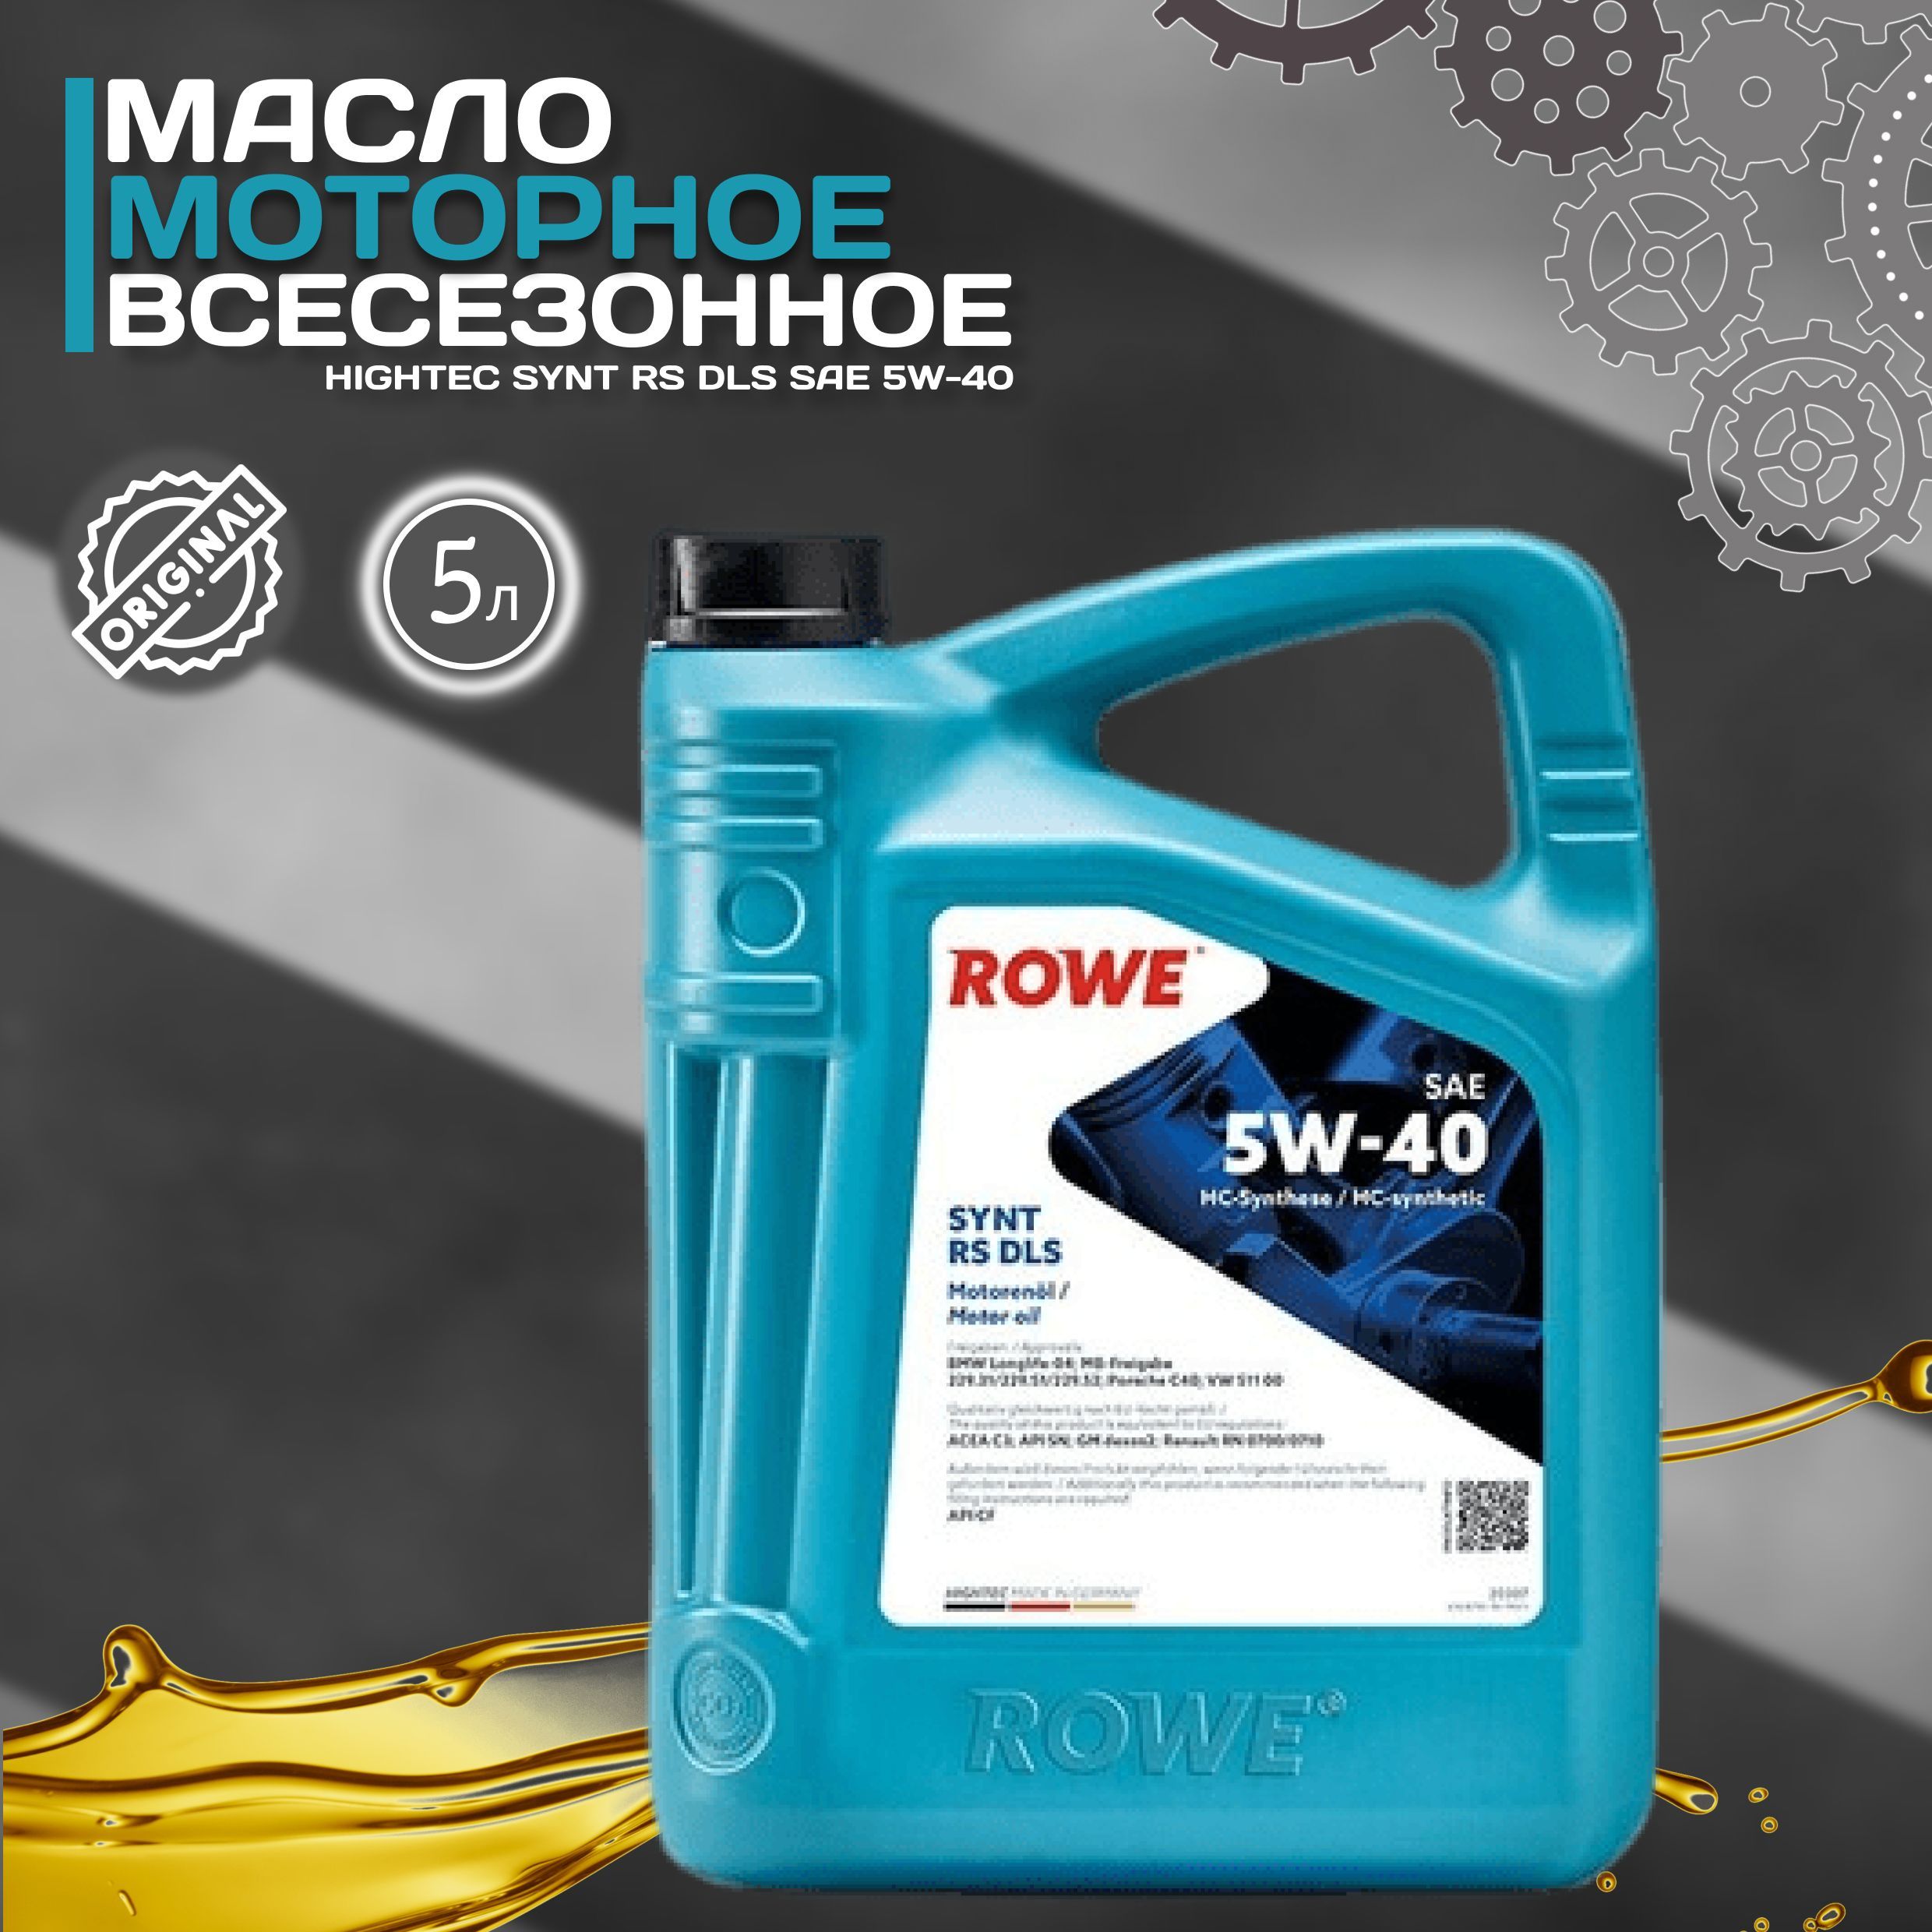 Rowe 5w40. Rowe Hightec Synt RS DLS. Rowe 5w40 Hightec Synt RC HC-D. Rowe 5w40 504 507.